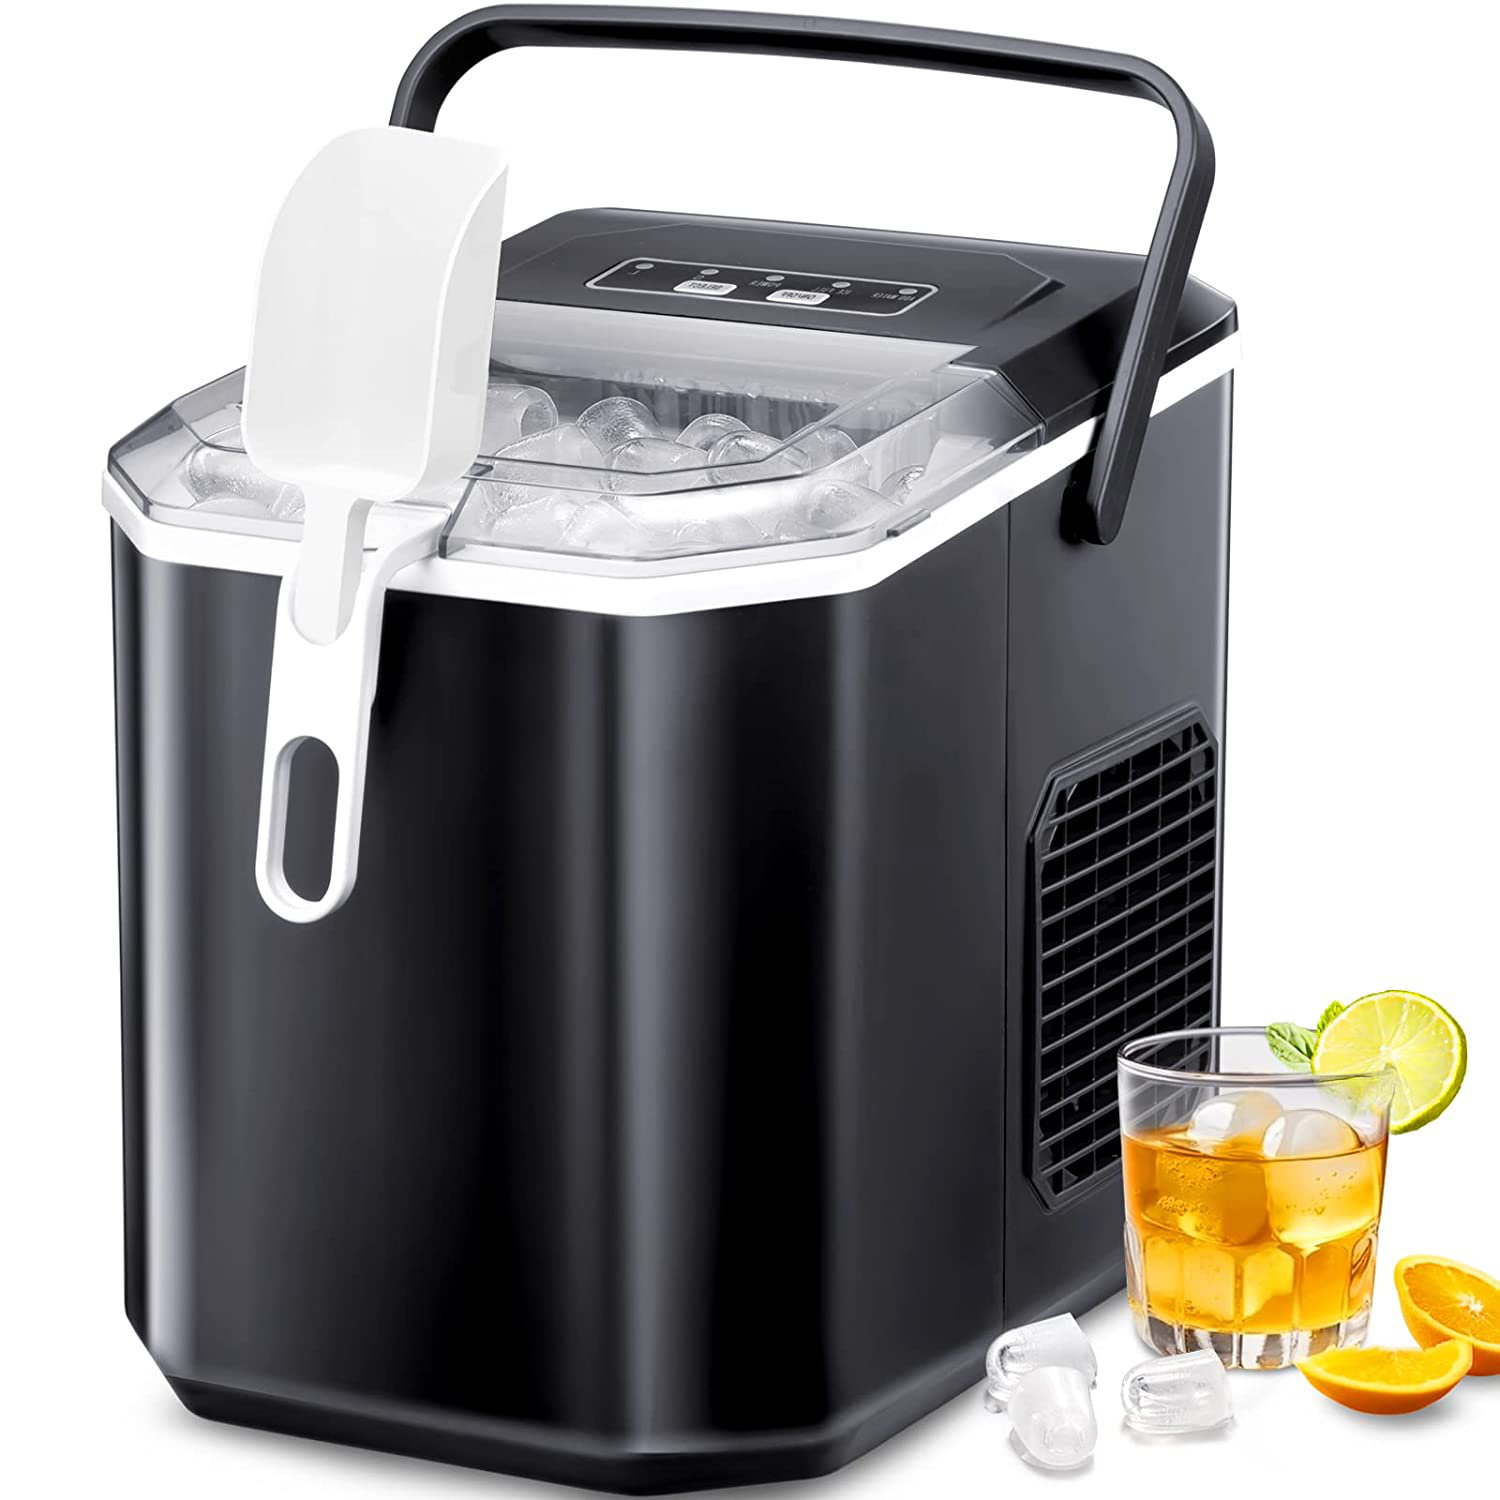 Colorlife 26 Lb. Daily Production Bullet Clear Ice Portable Ice Maker